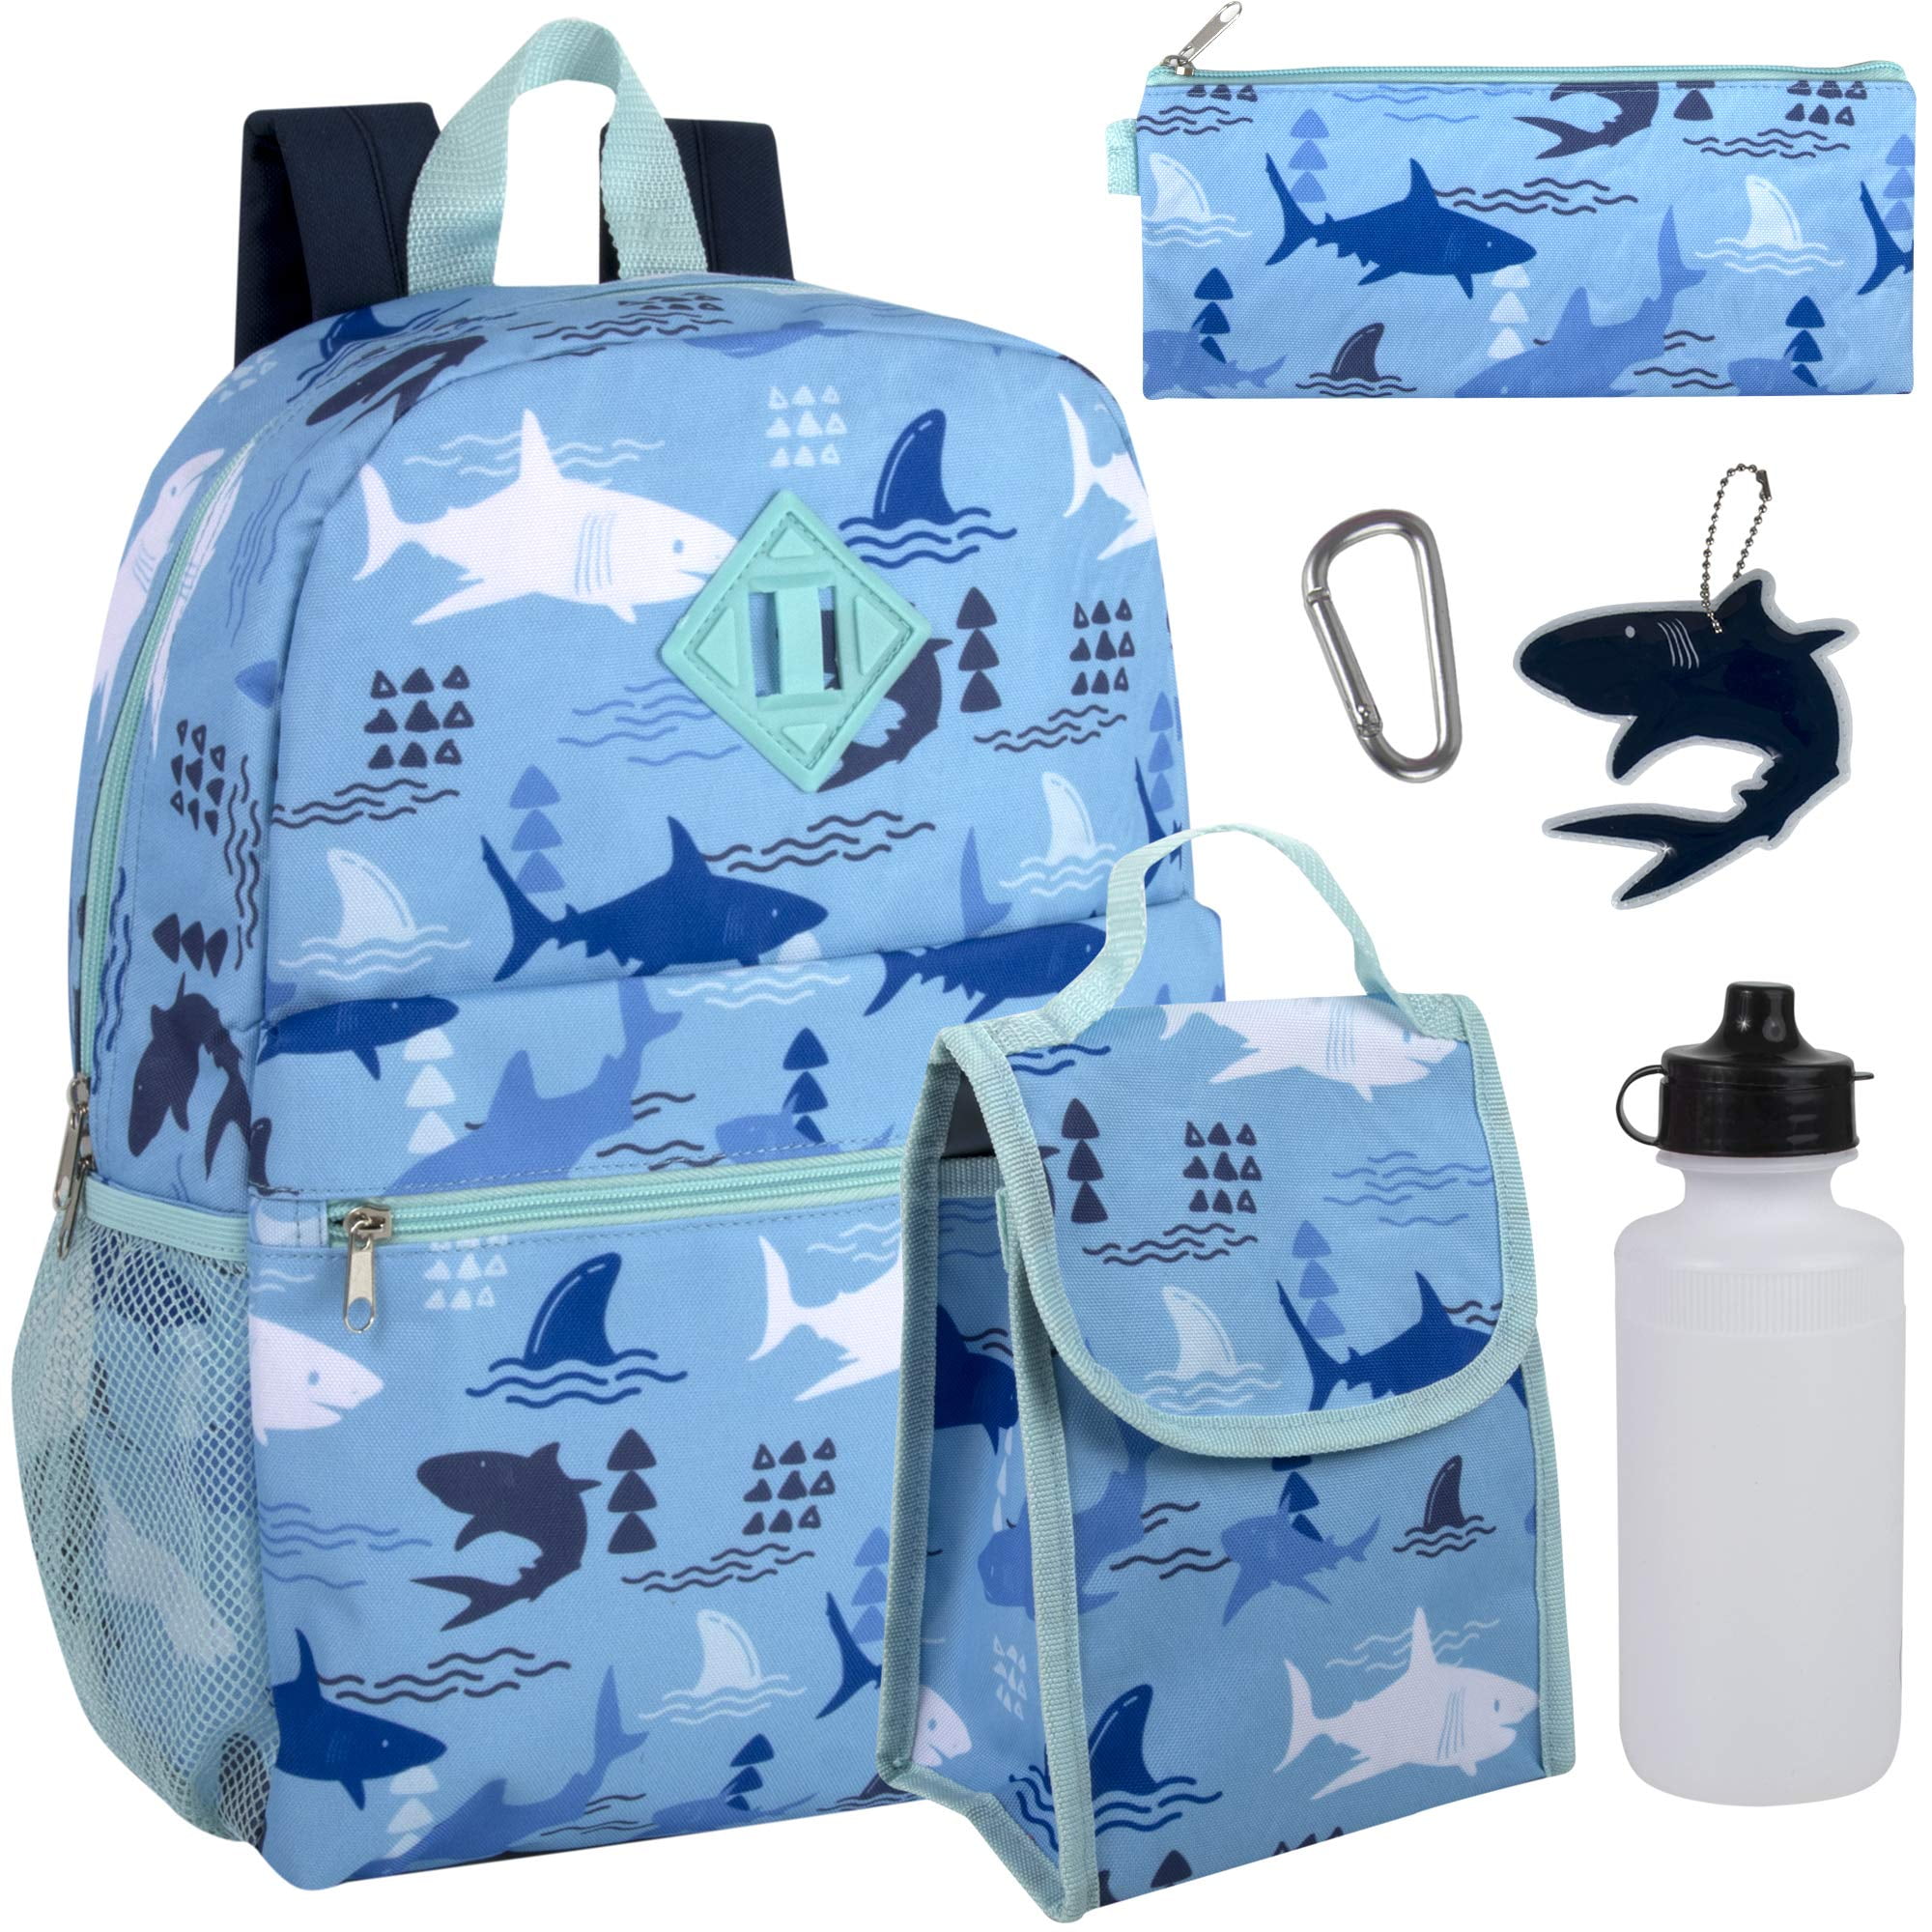 Boys 16L 6 in 1 Backpack with Matching Lunch Bag, Pencil Case